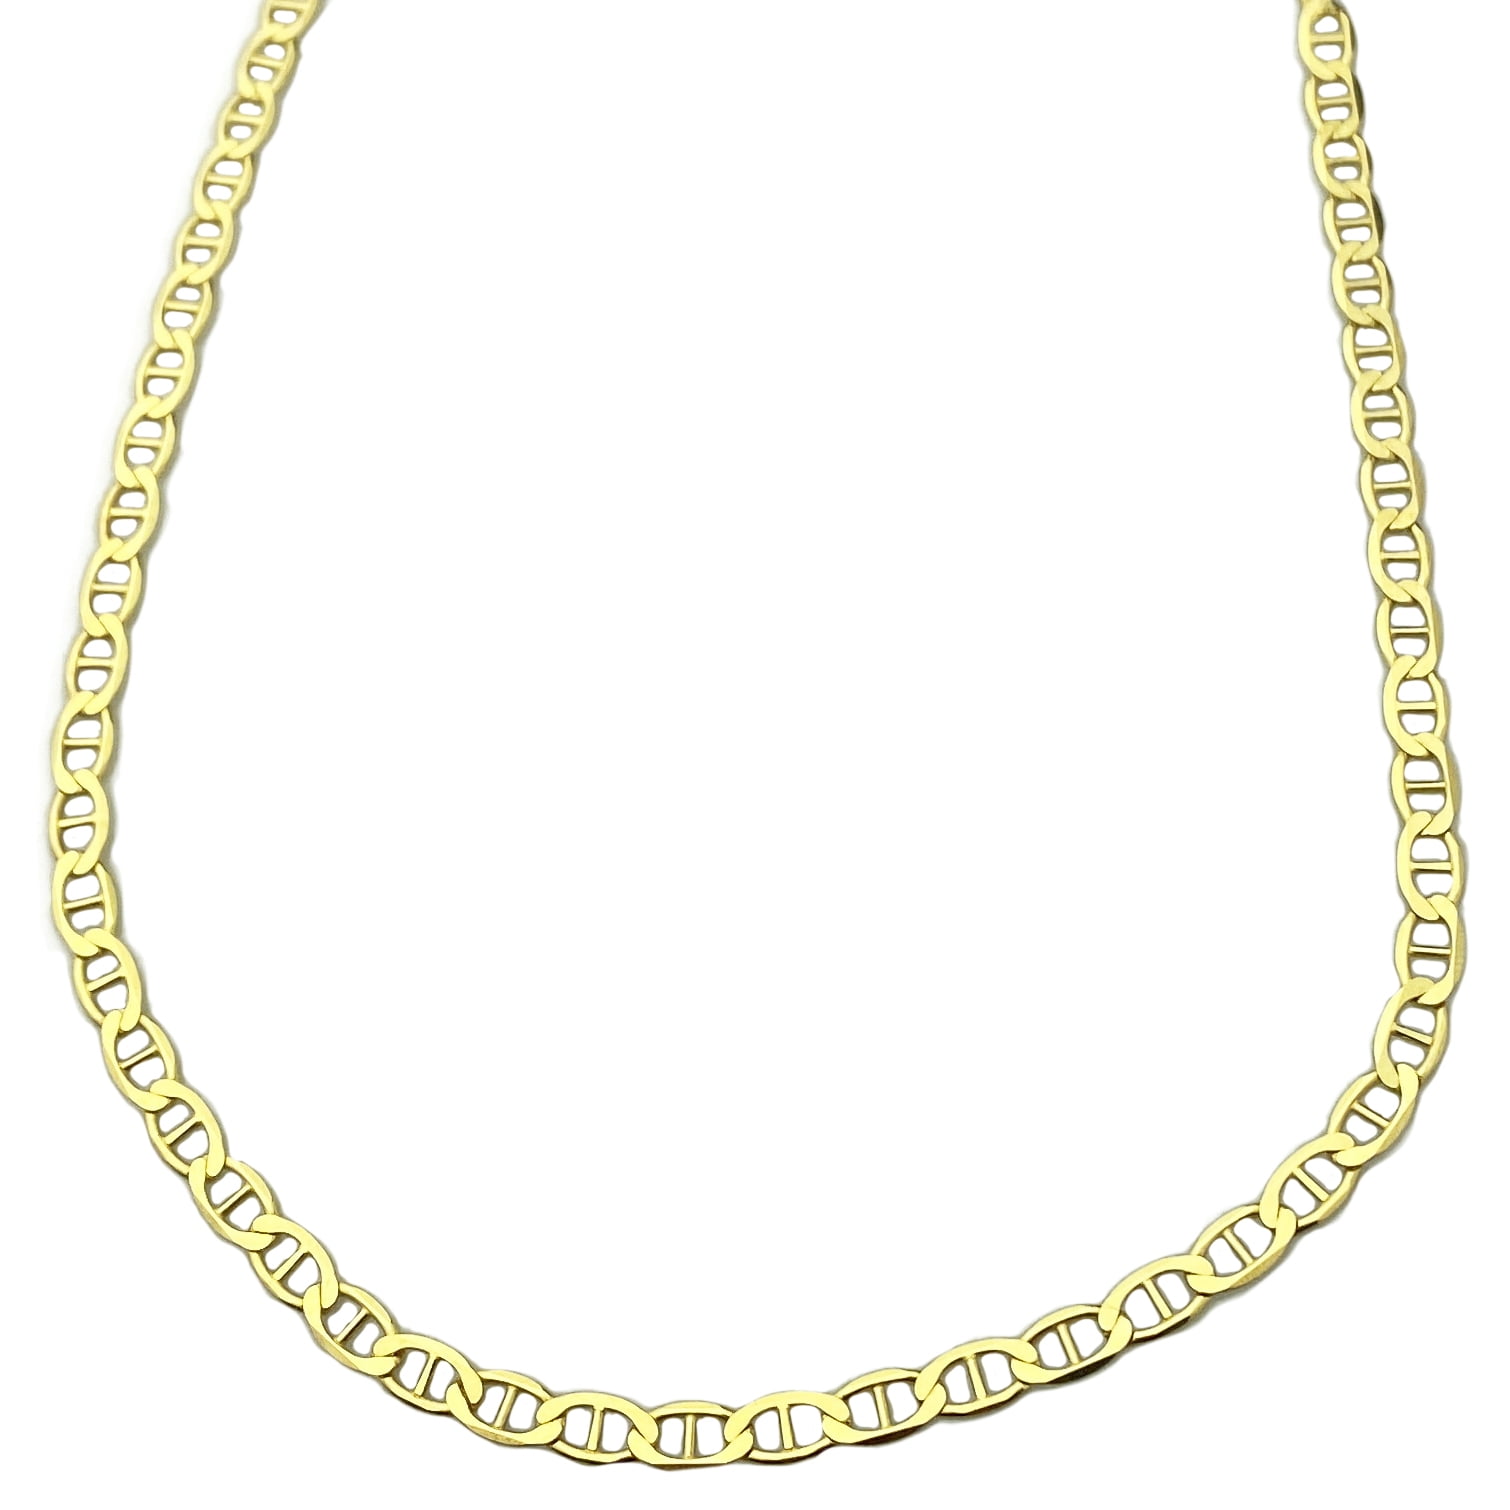 Vermeil (Sterling silver 925 Gold plated) Herringbone chain 5.25mm Finished